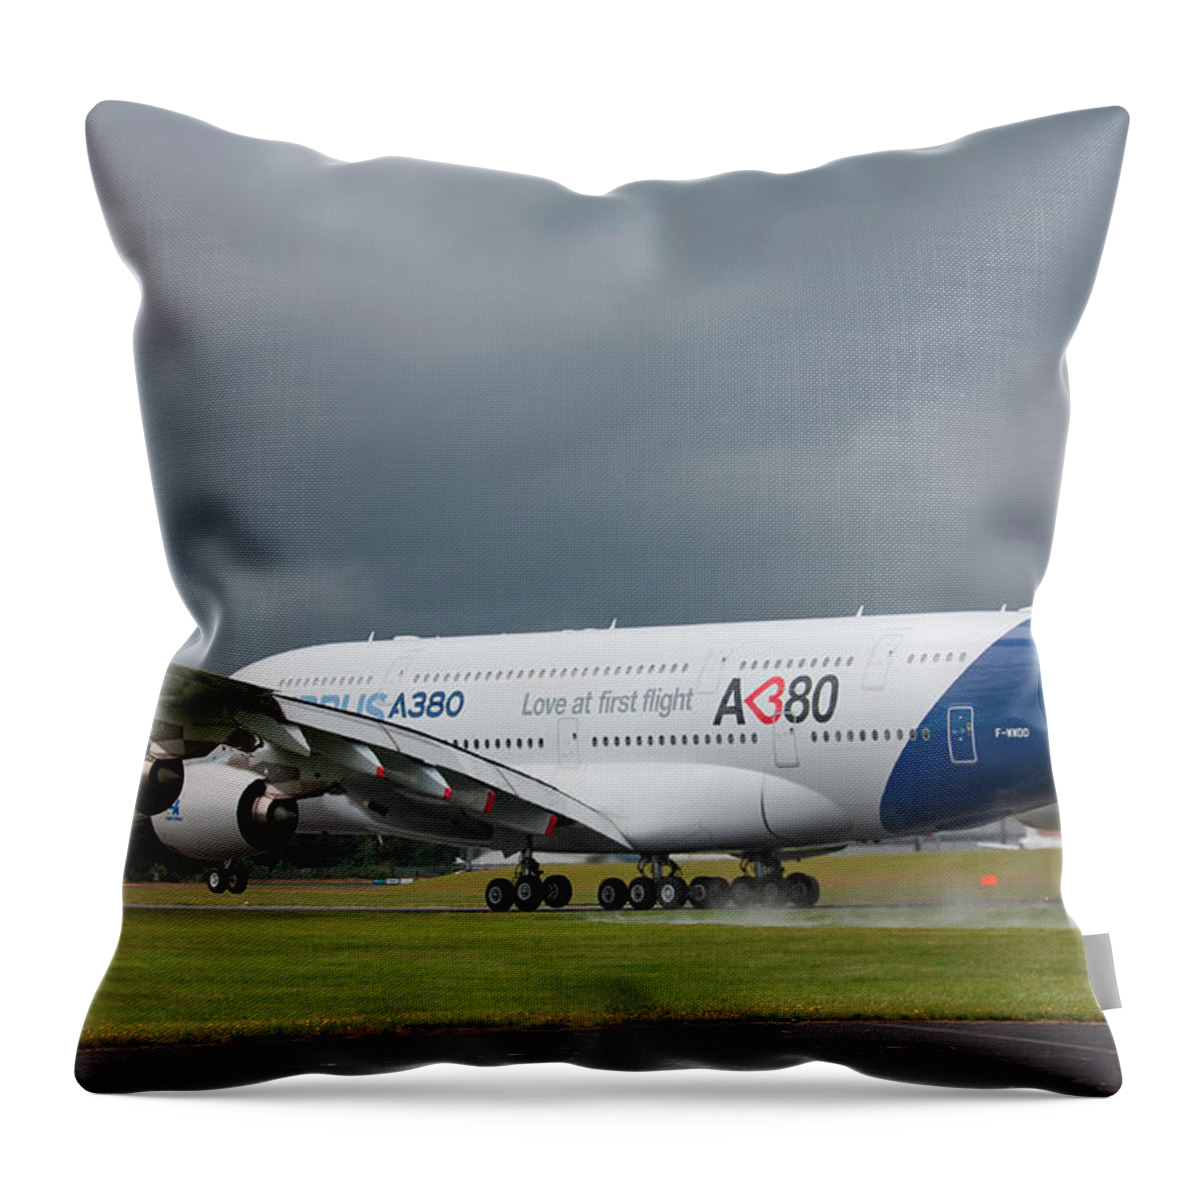 Airbus A380 Throw Pillow featuring the photograph Airbus A380 by Shirley Mitchell